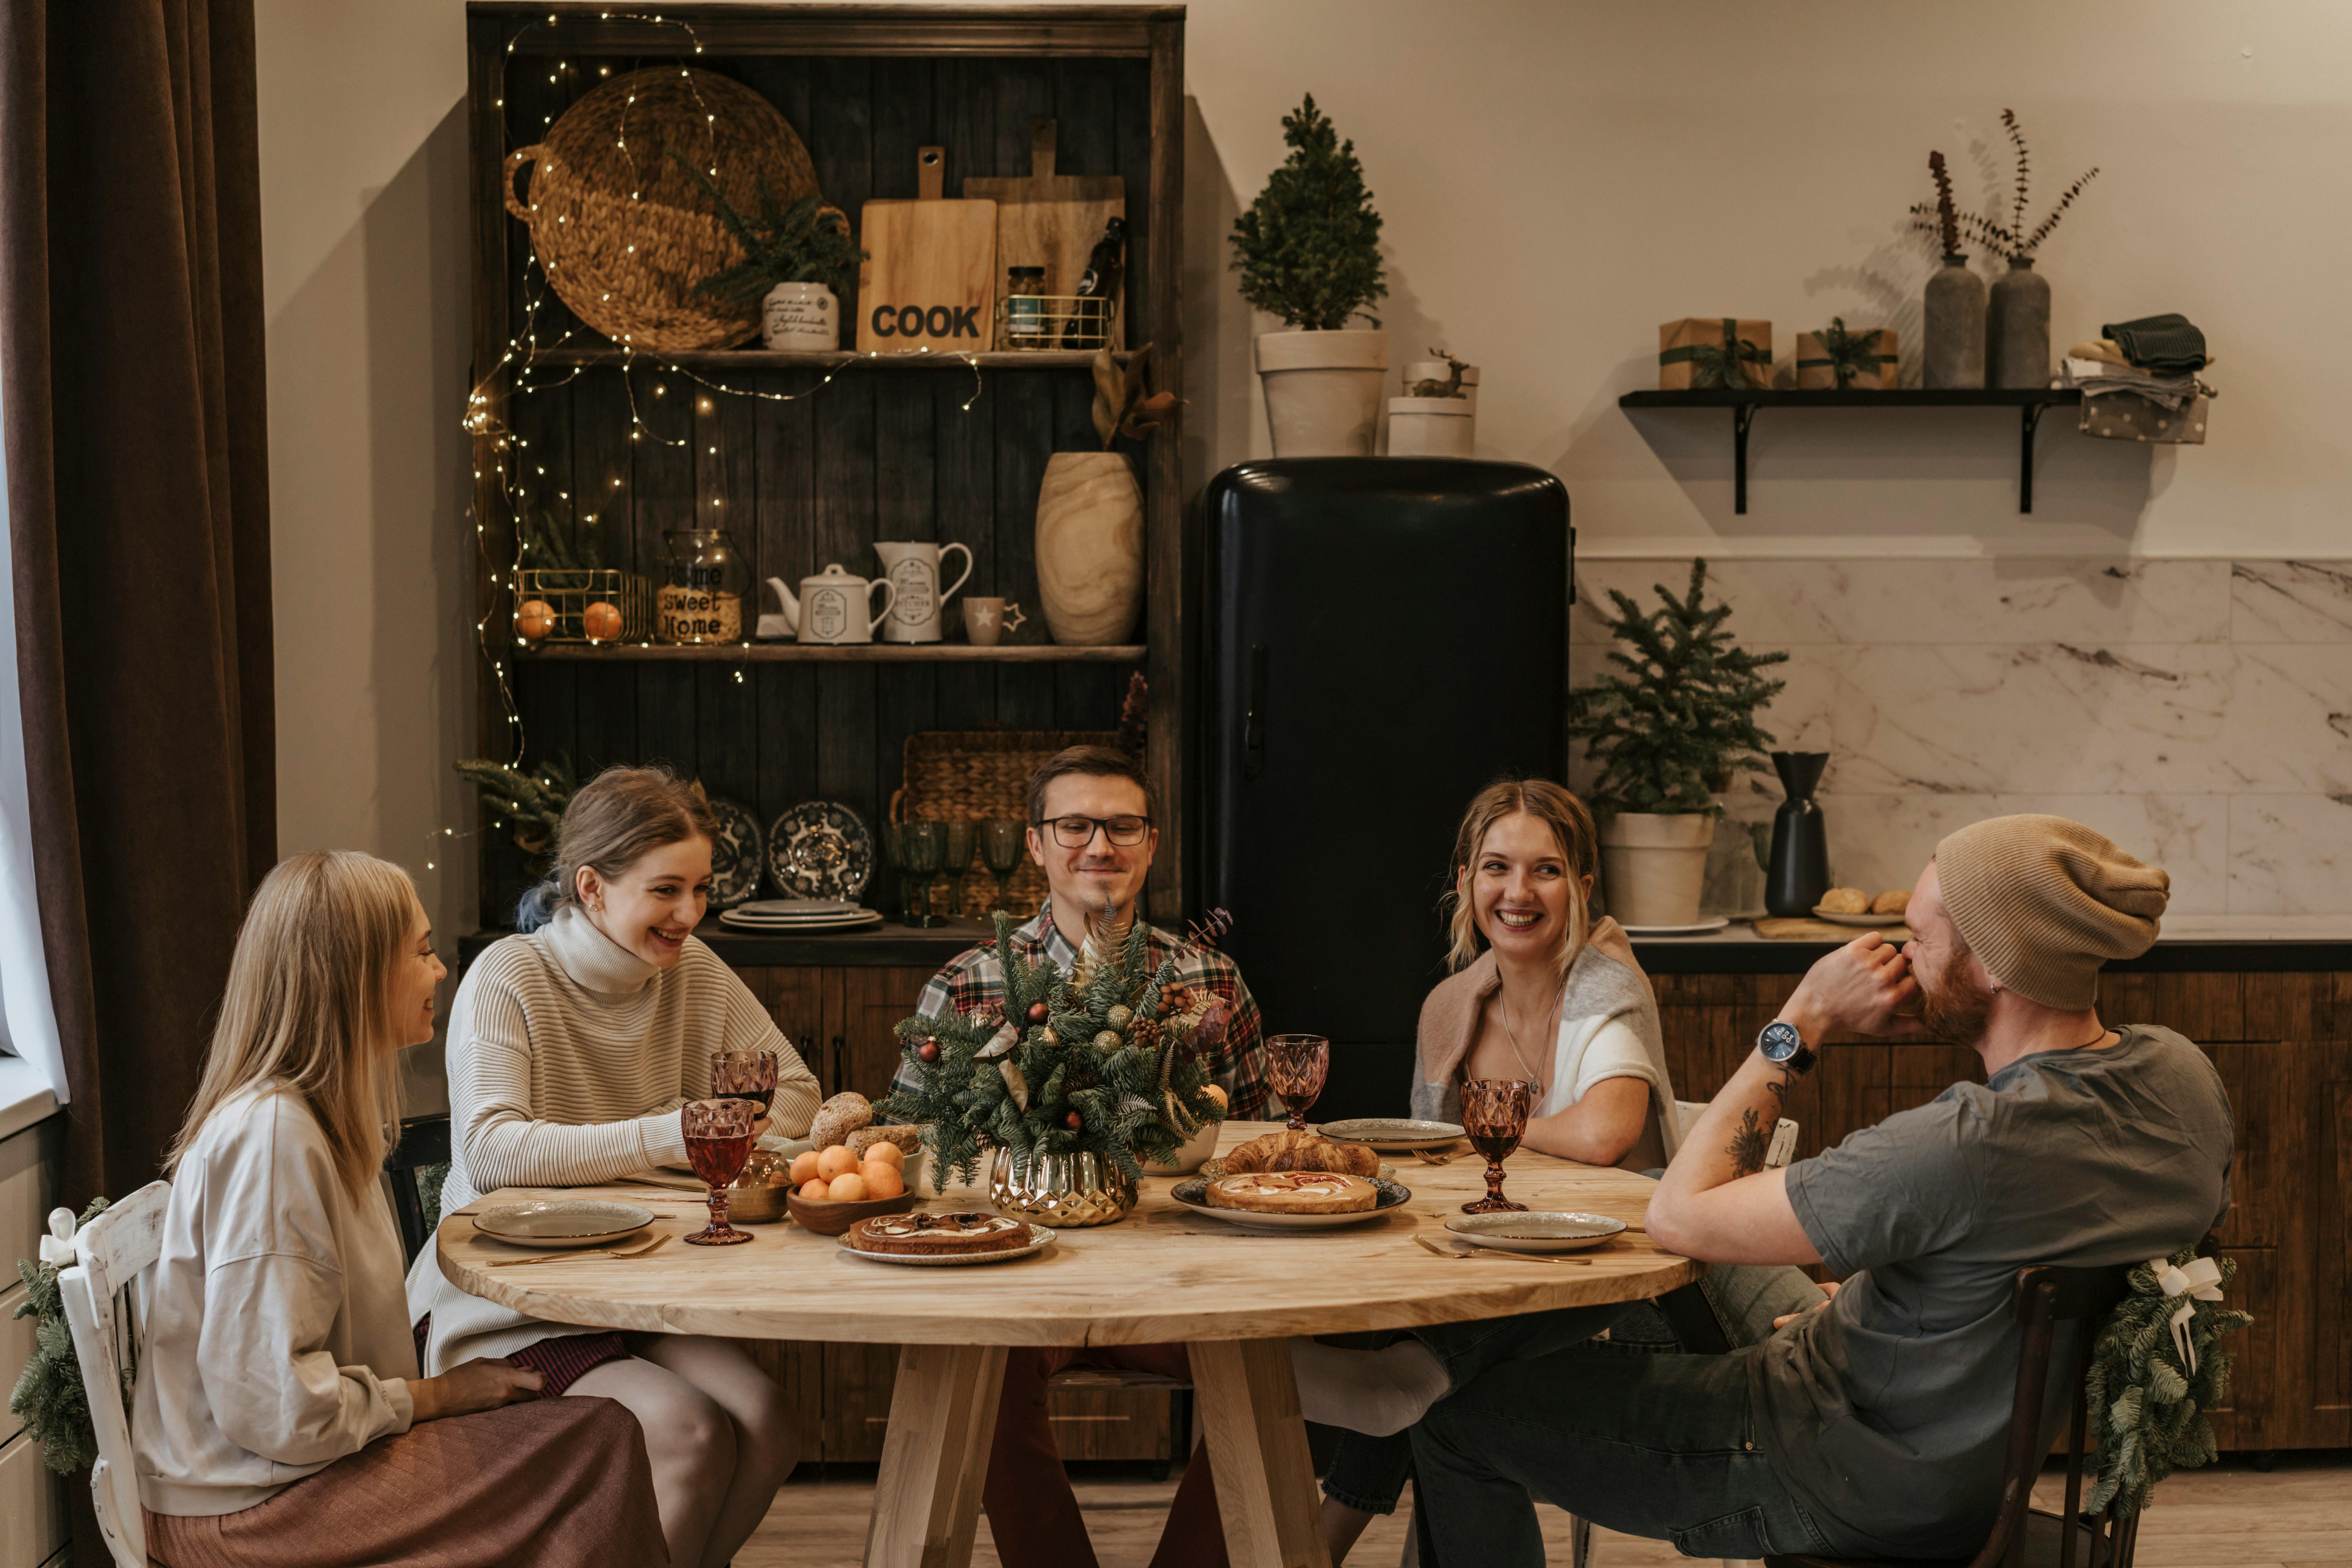 A family around a table | Source: Pexels